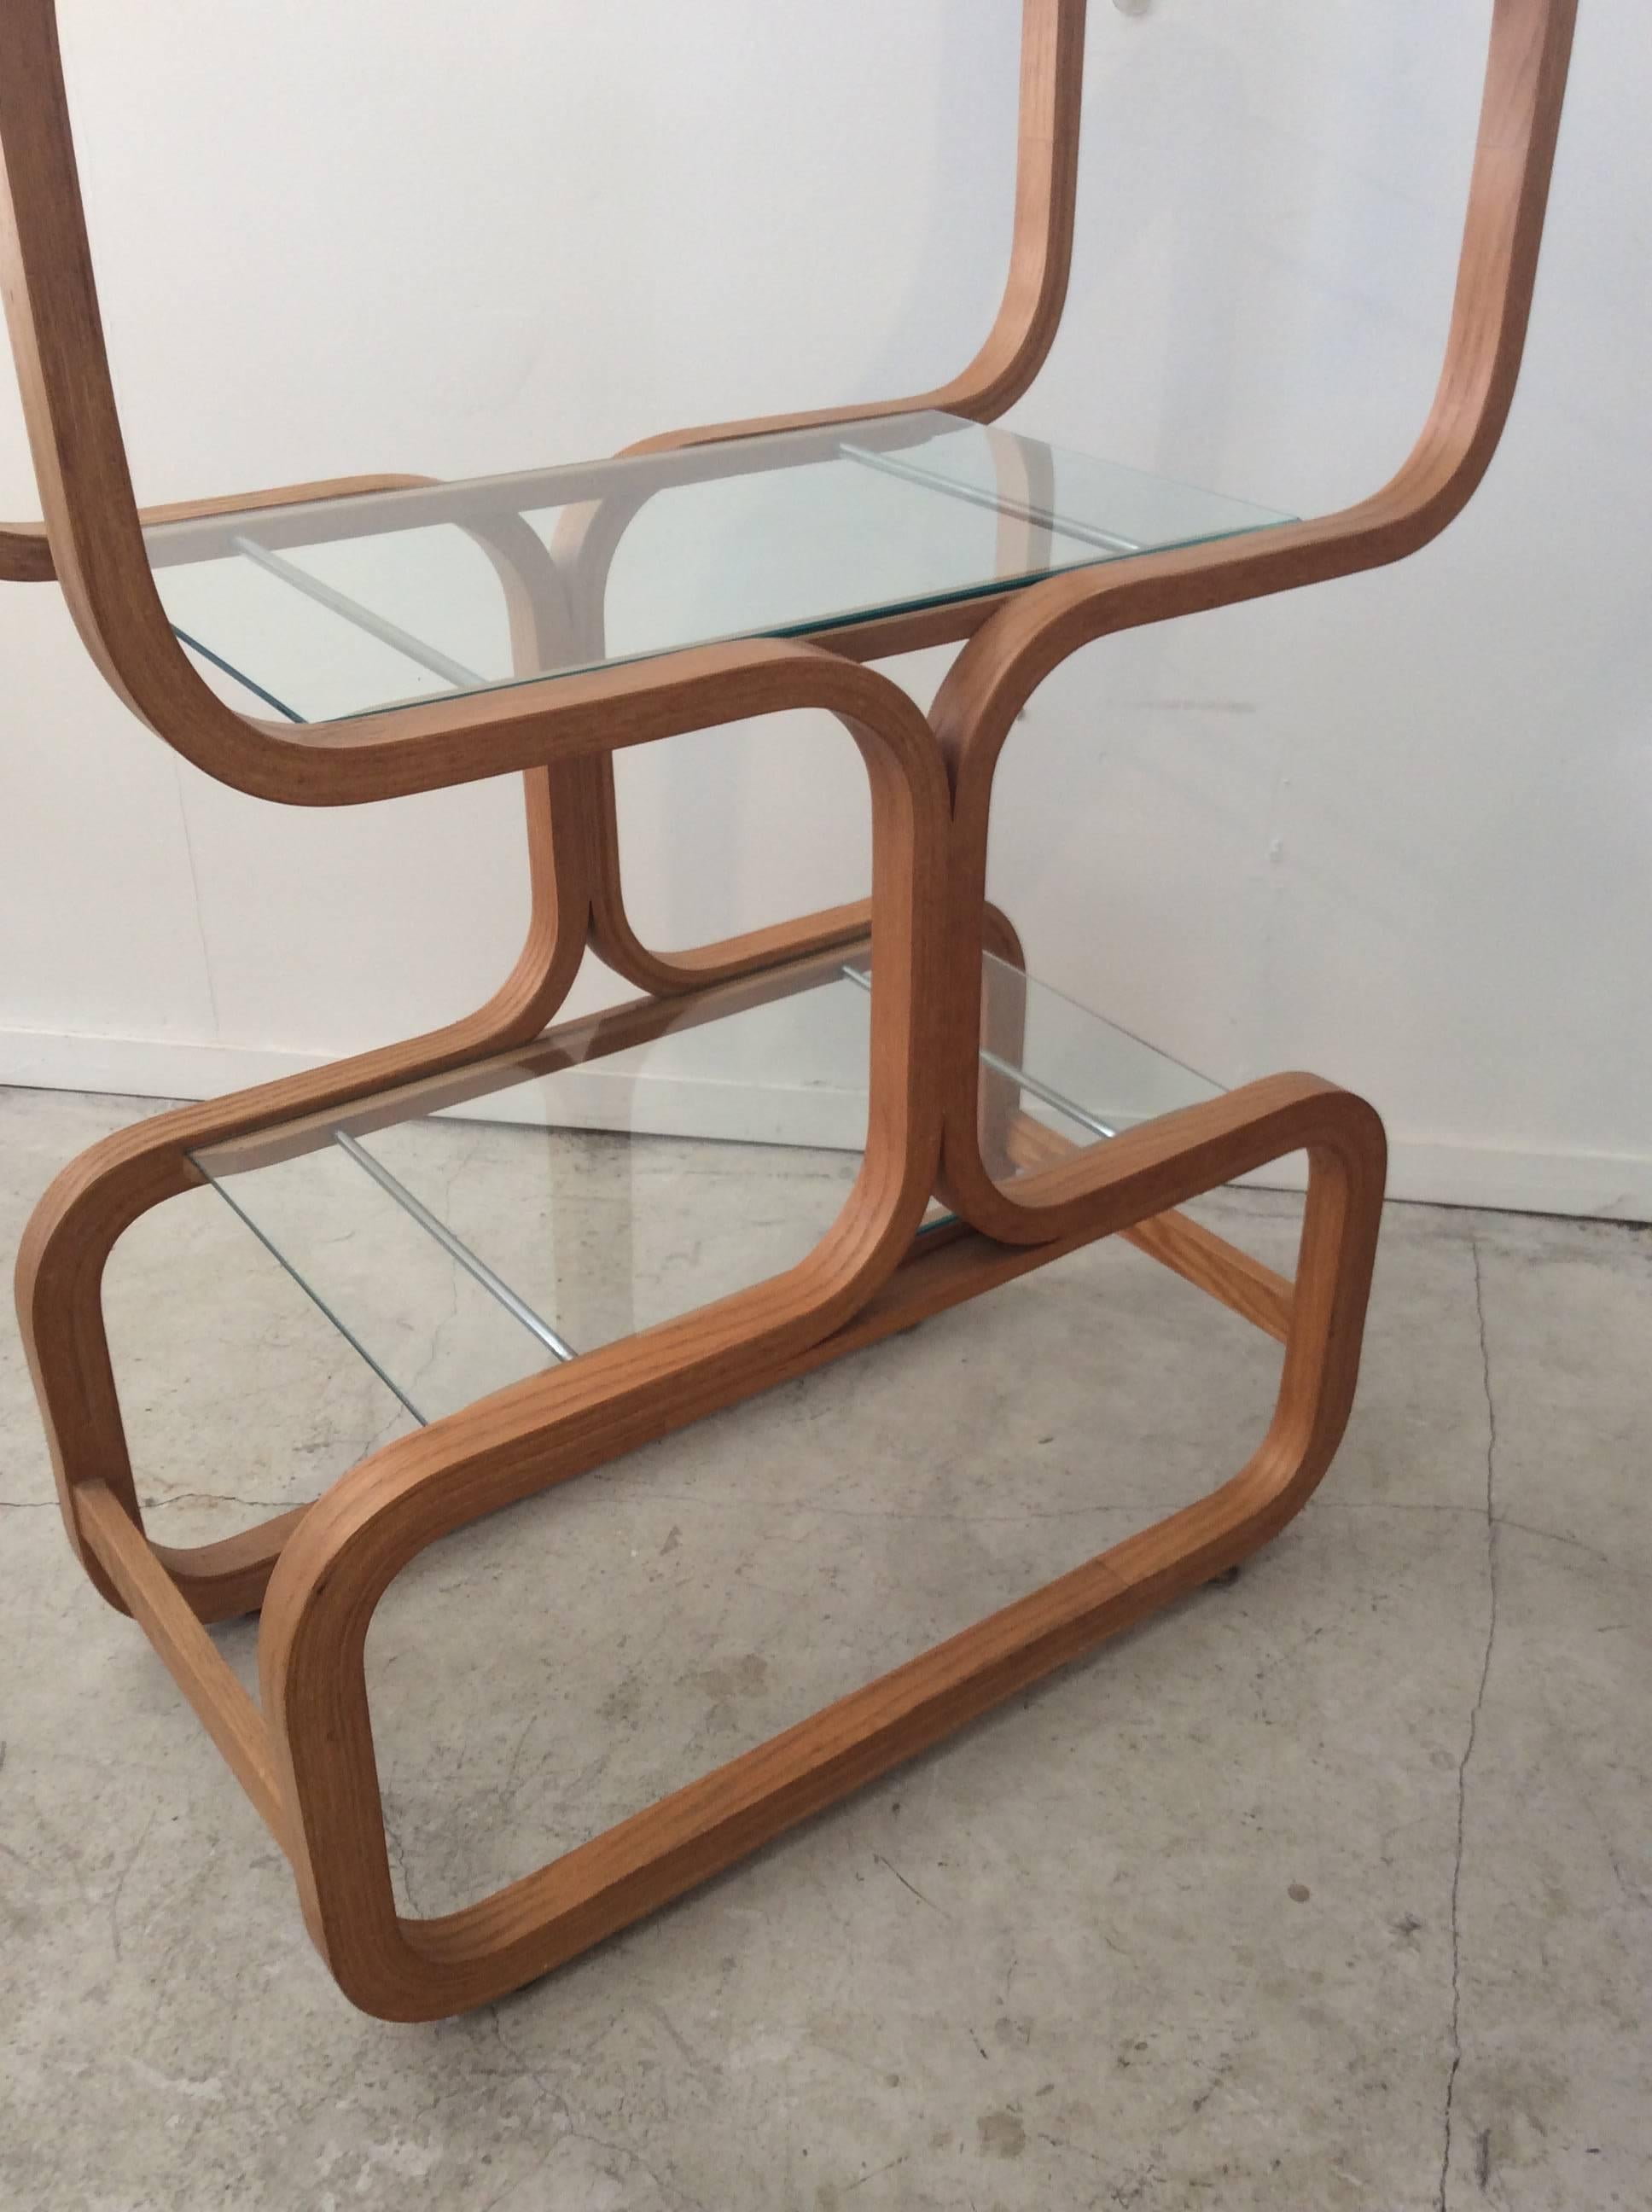 20th Century Mid-Century Modern Sculptural Molded Plywood Glass Etagere Wormley Dunbar Style For Sale